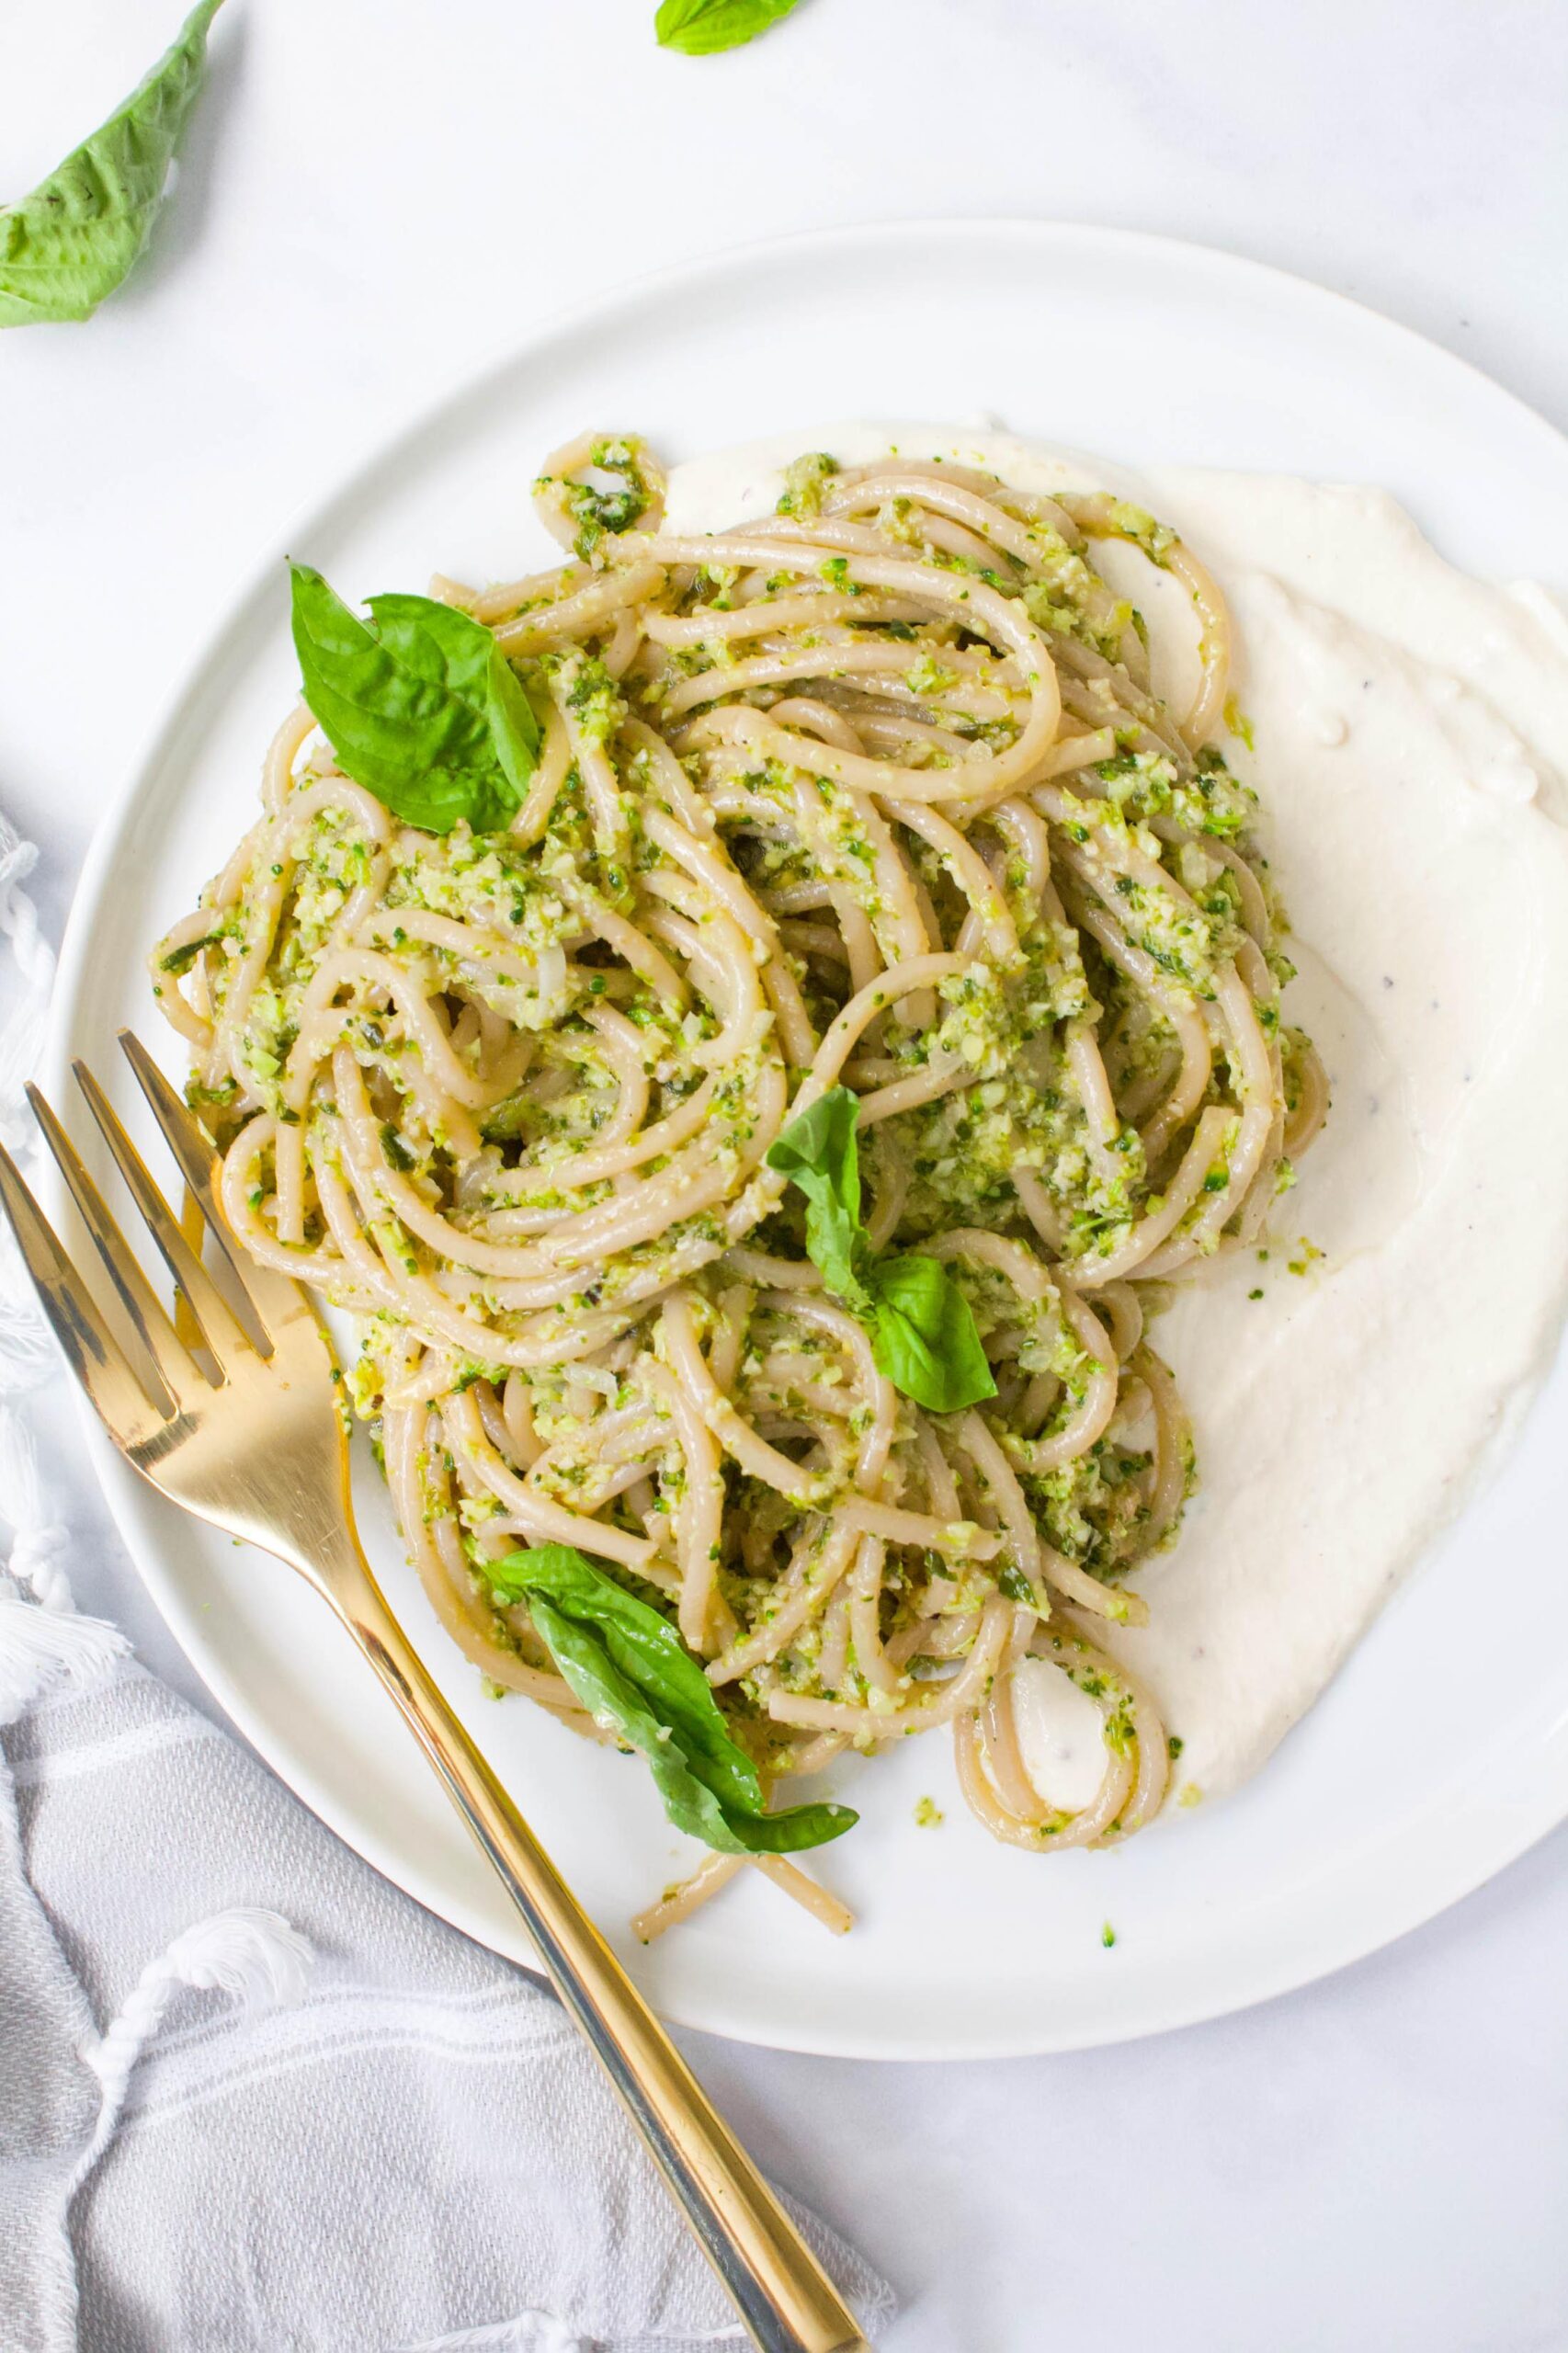  Broccoli adds a fulfilling crunch to this creamy pesto pasta